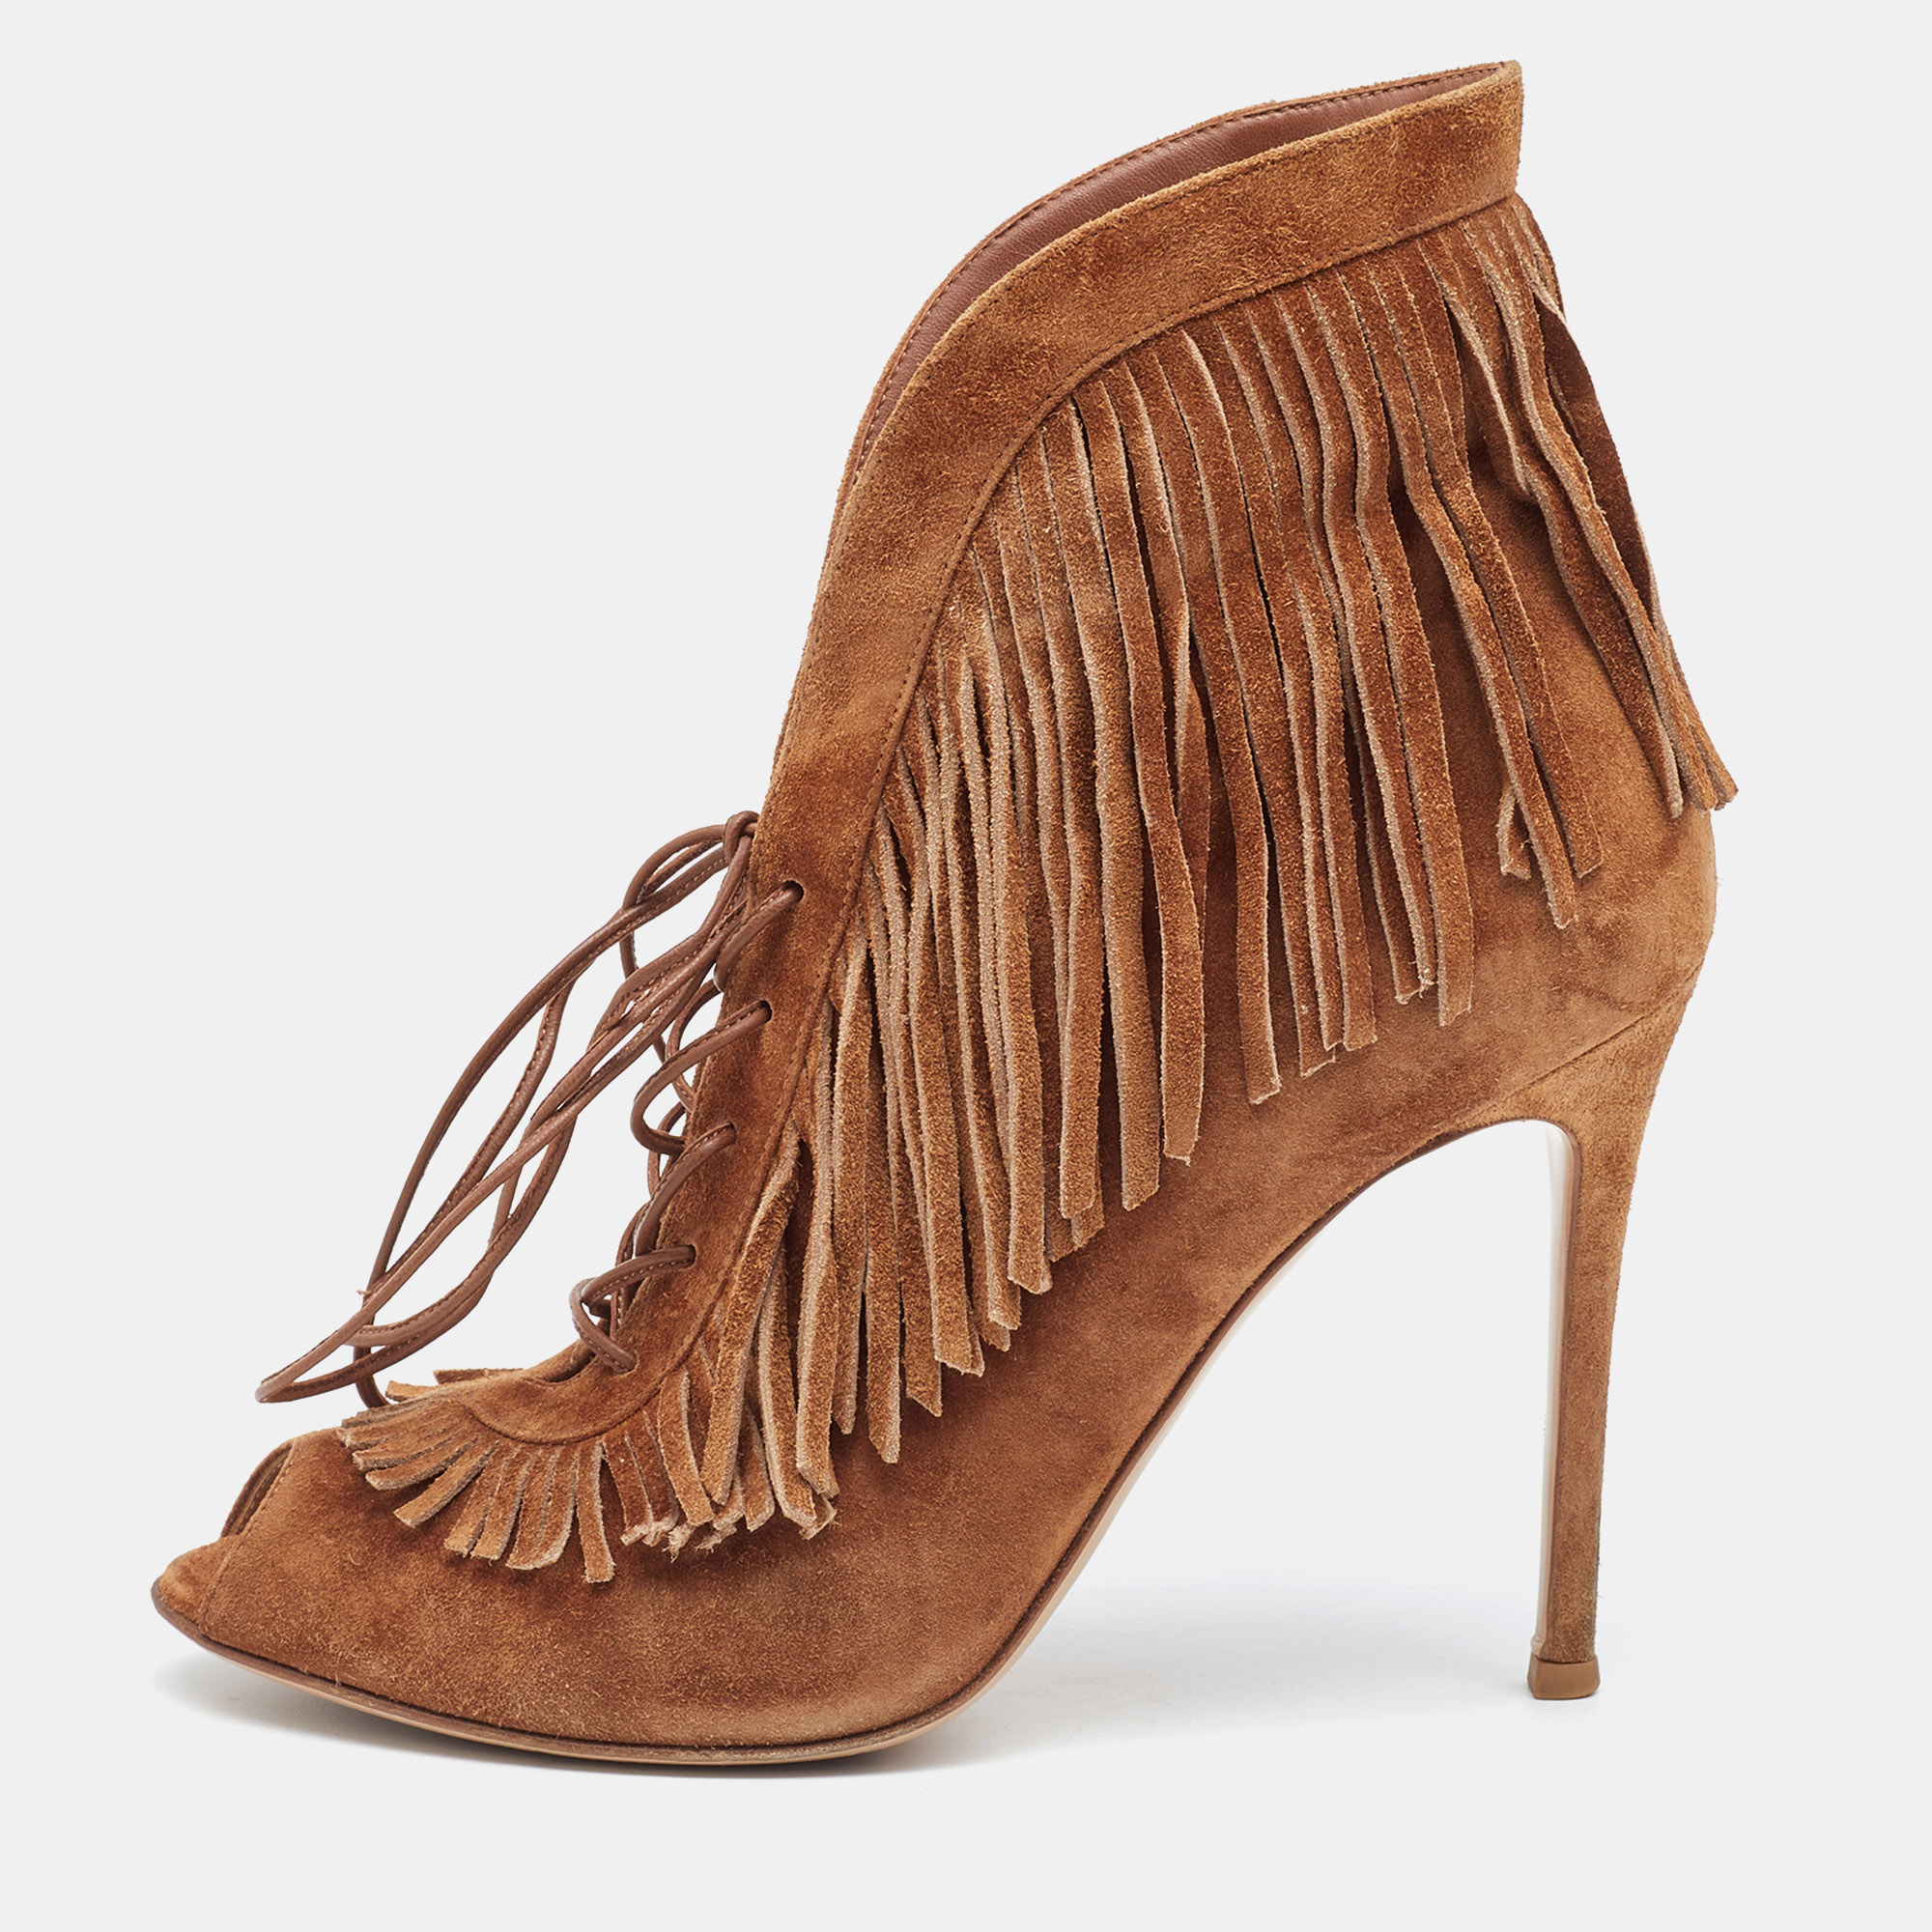 Gianvito Rossi Tan Suede Fringe Lace Up Ankle Booties Size 39